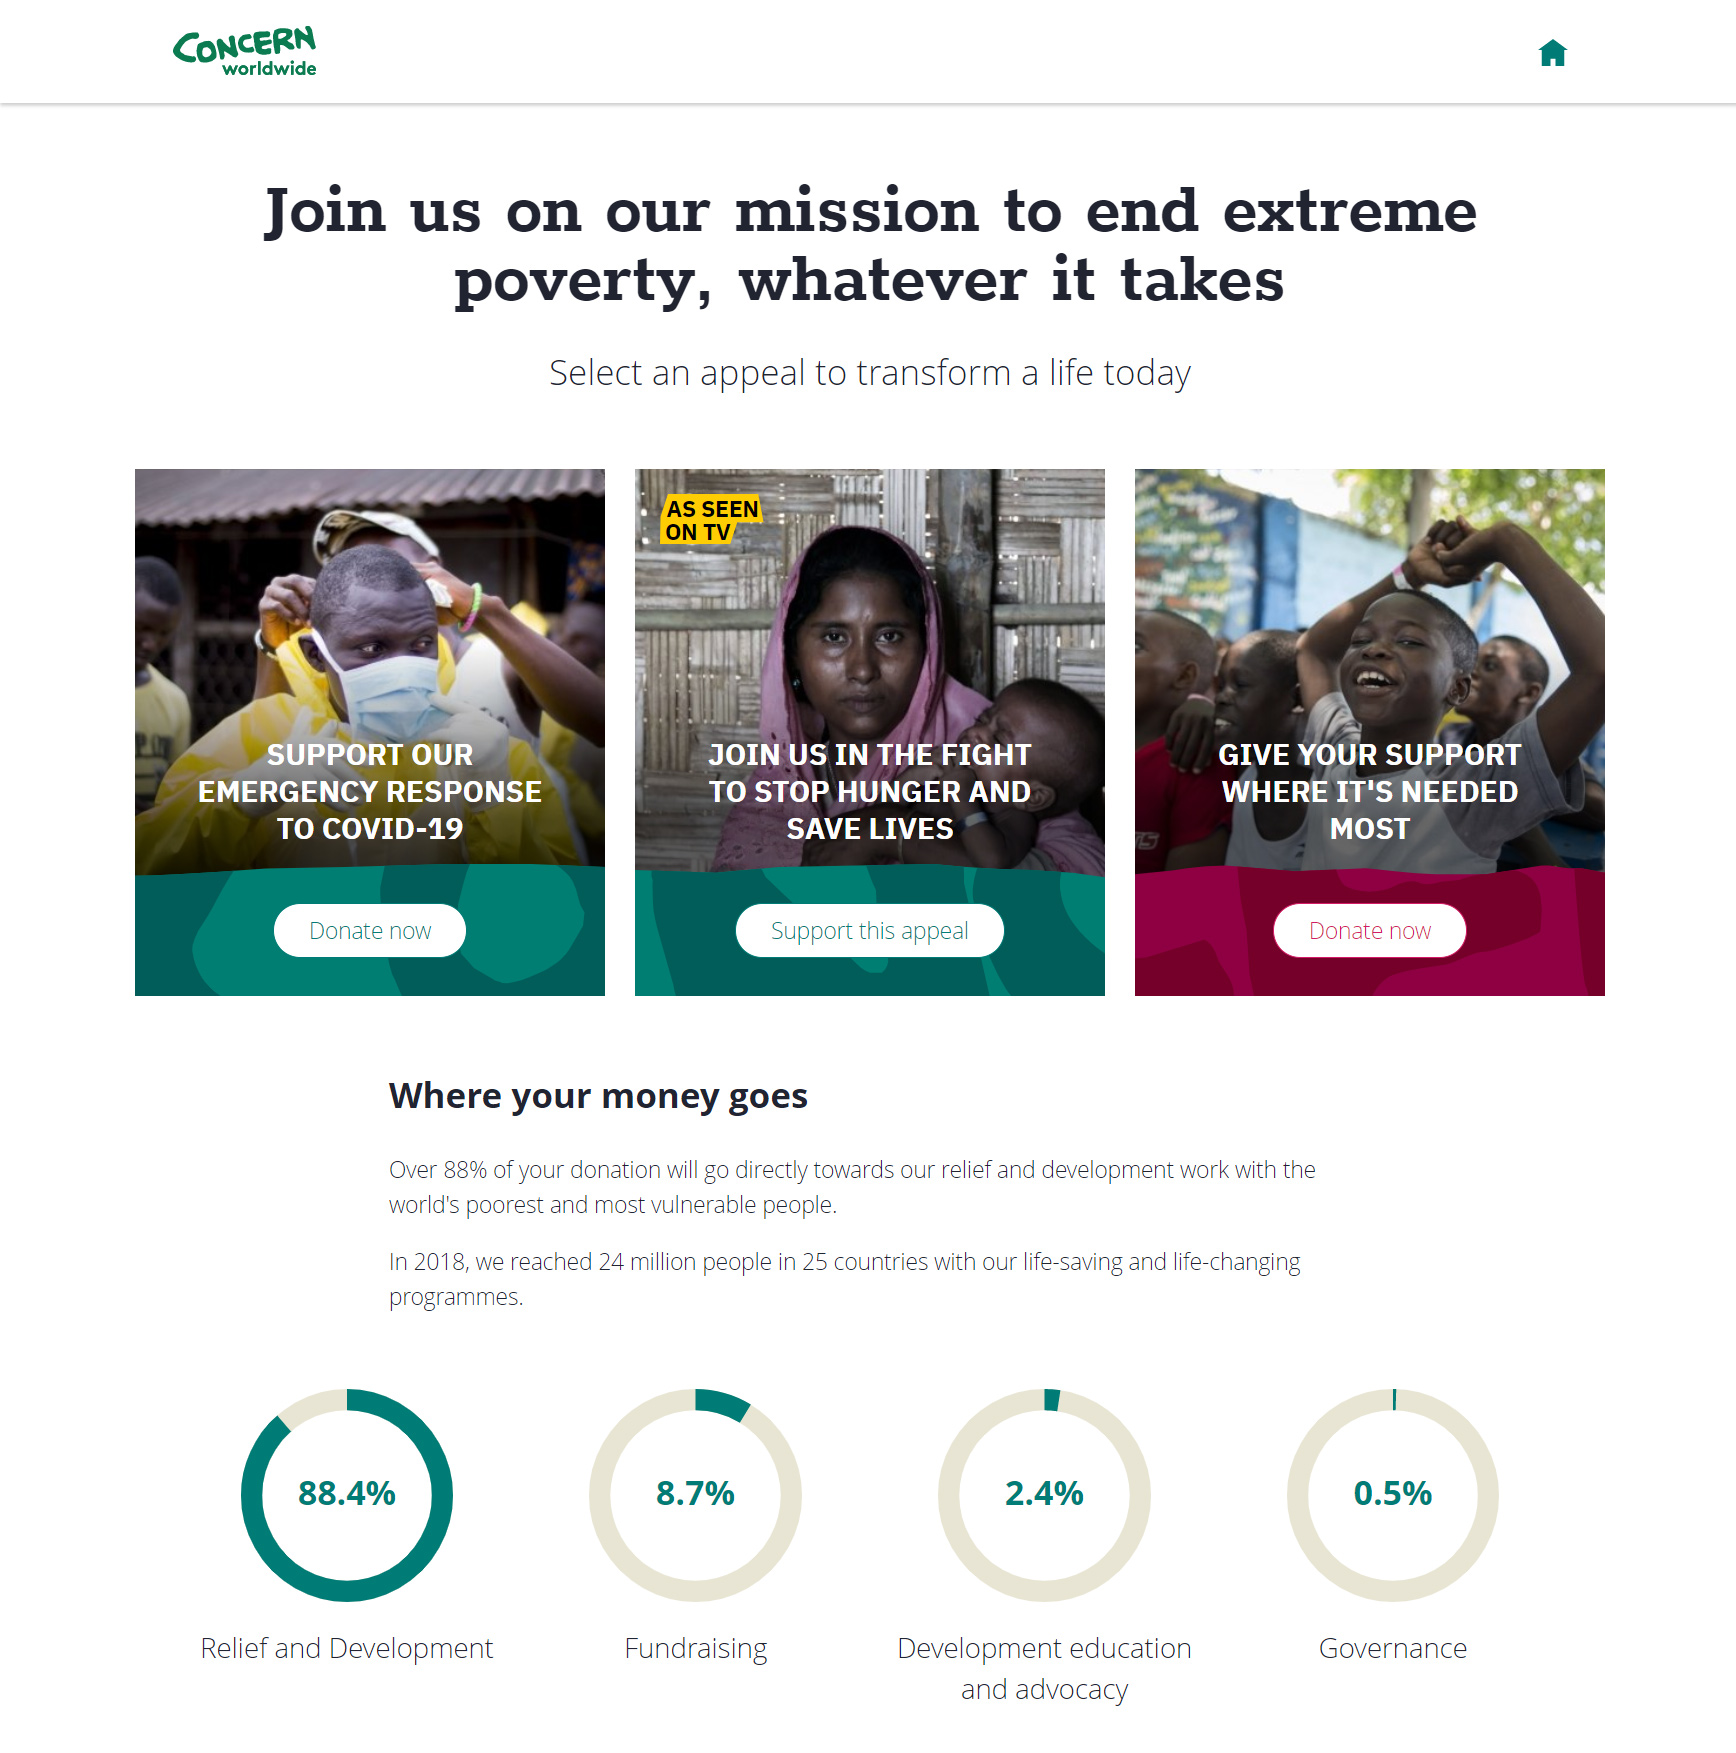 The Concern.net donation page